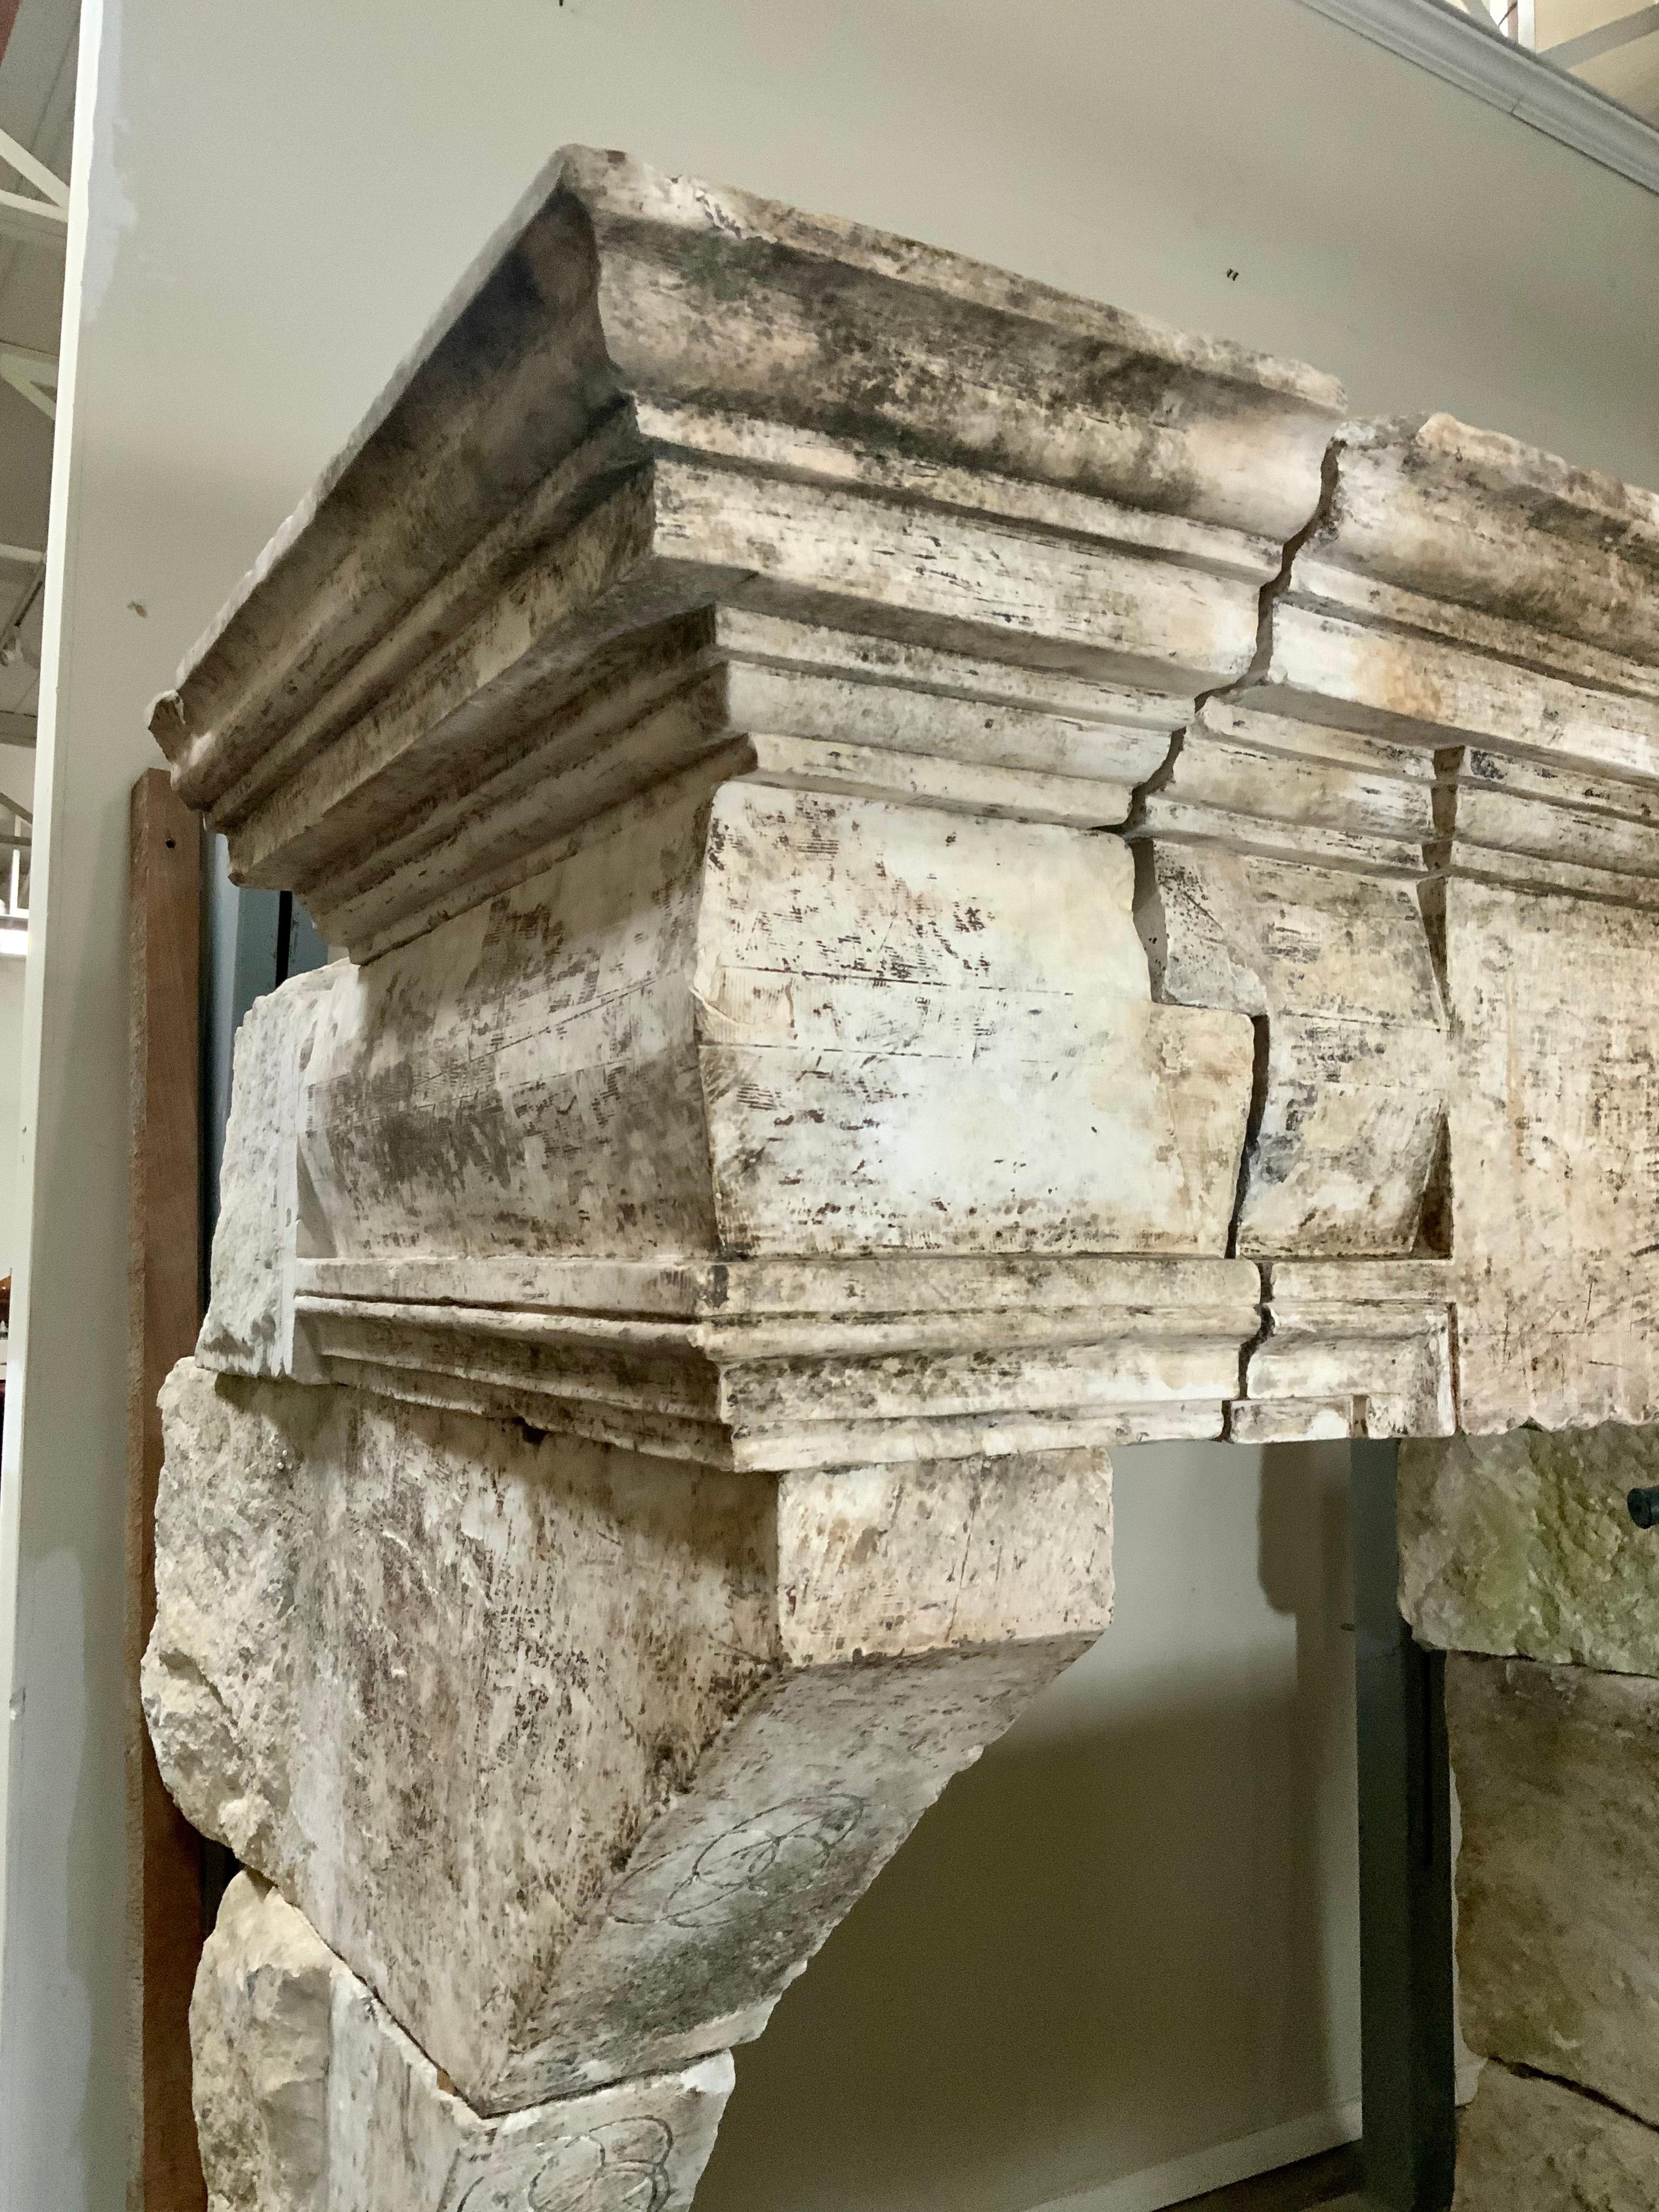 This limestone fireplace origins from France, circa 1650.

Firebox measurements: W 60